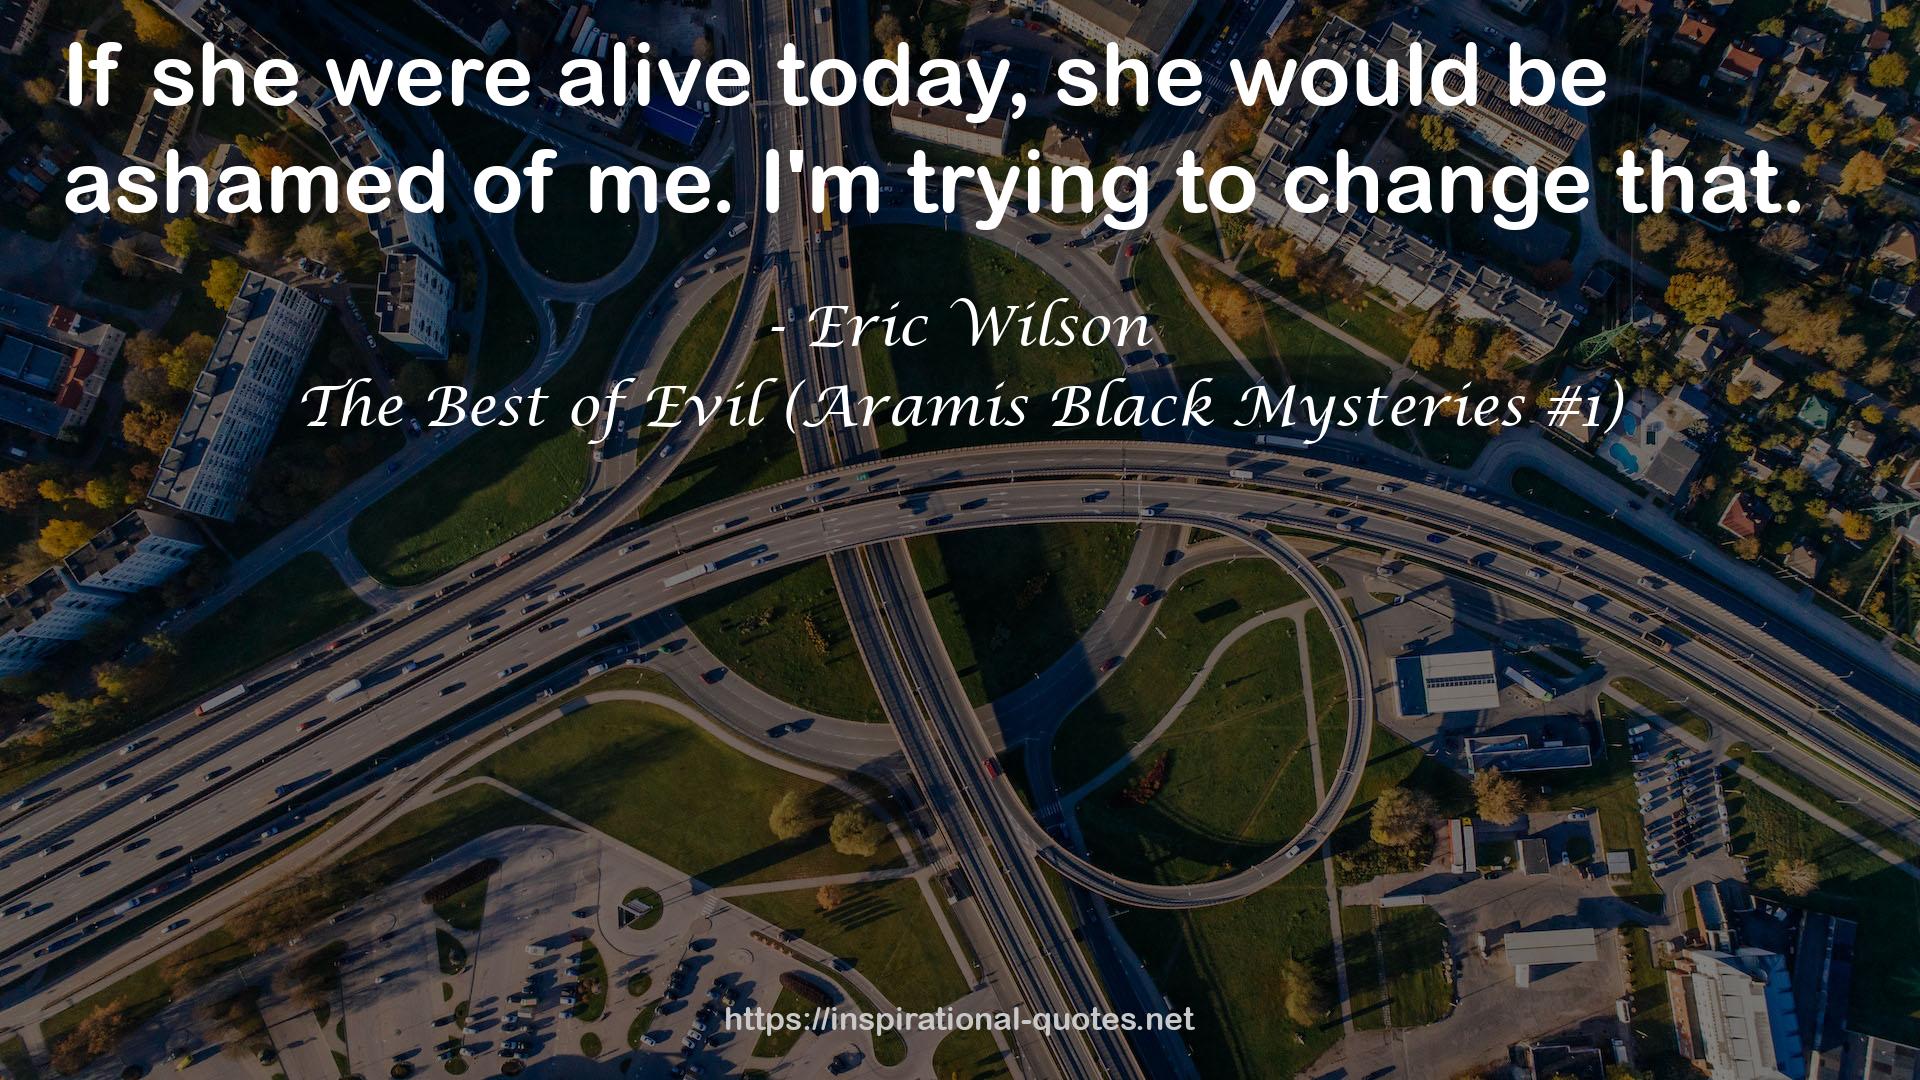 The Best of Evil (Aramis Black Mysteries #1) QUOTES